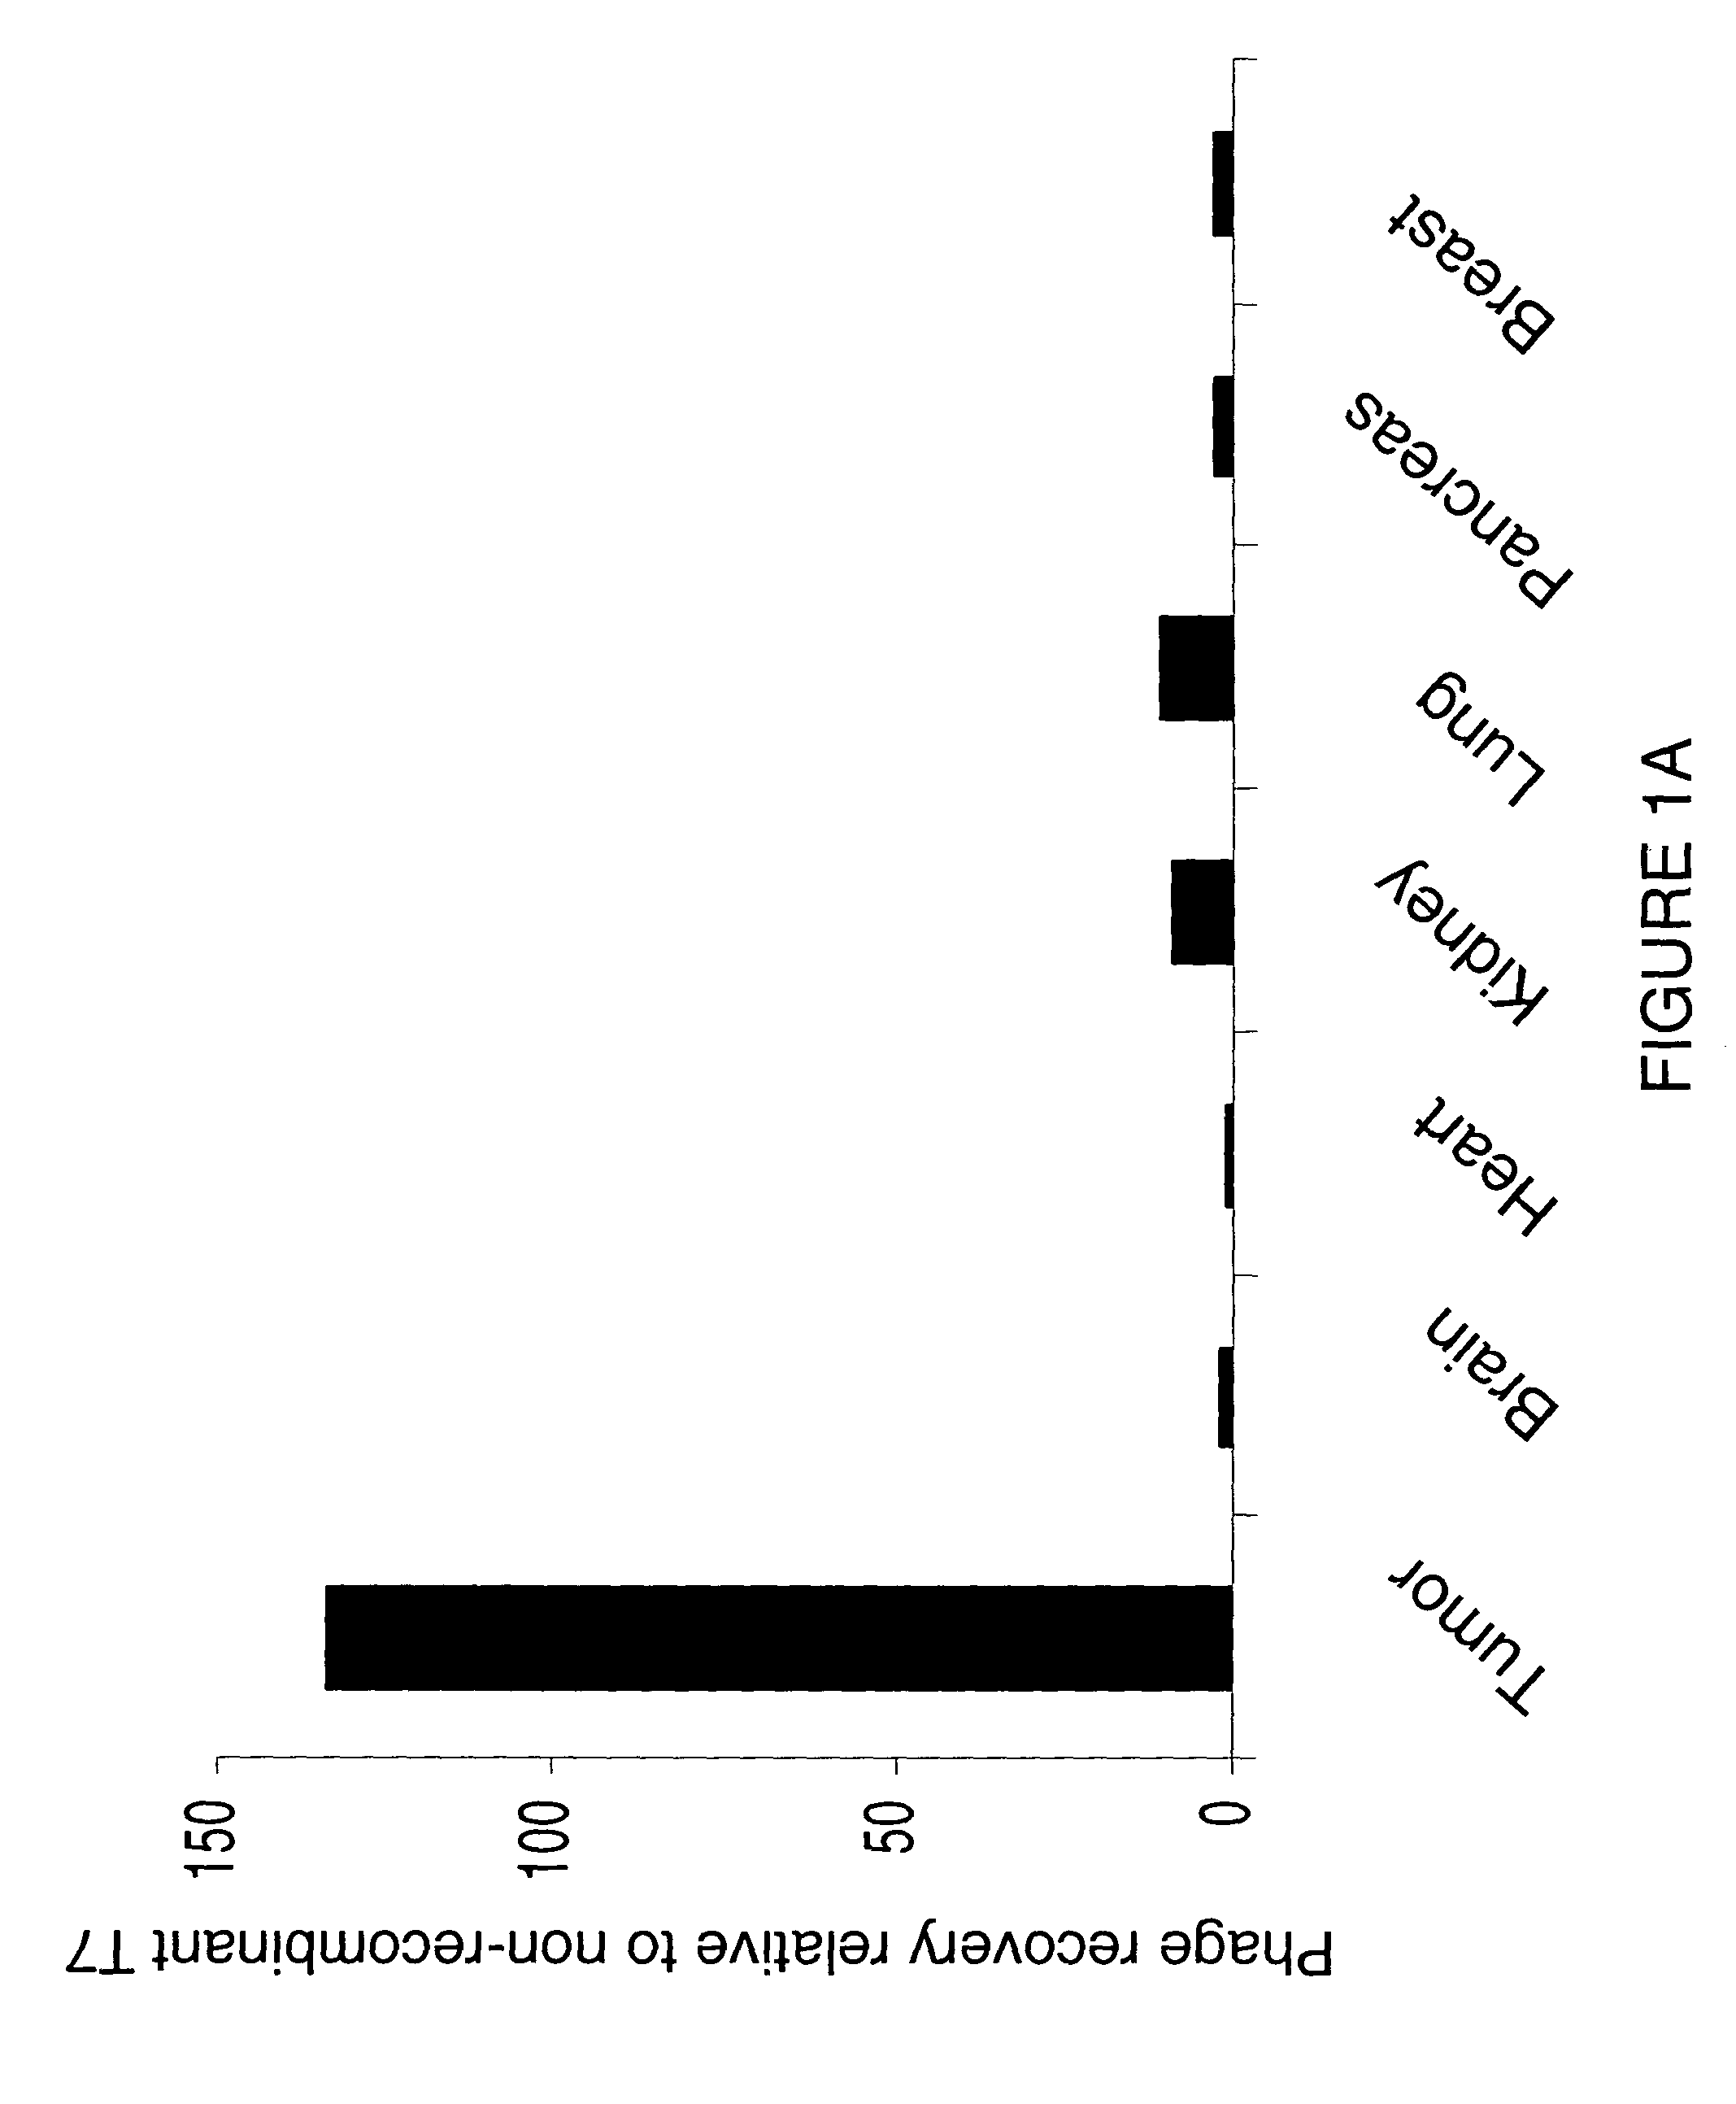 Collagen-binding molecules that selectively home to tumor vasculature and methods of using same